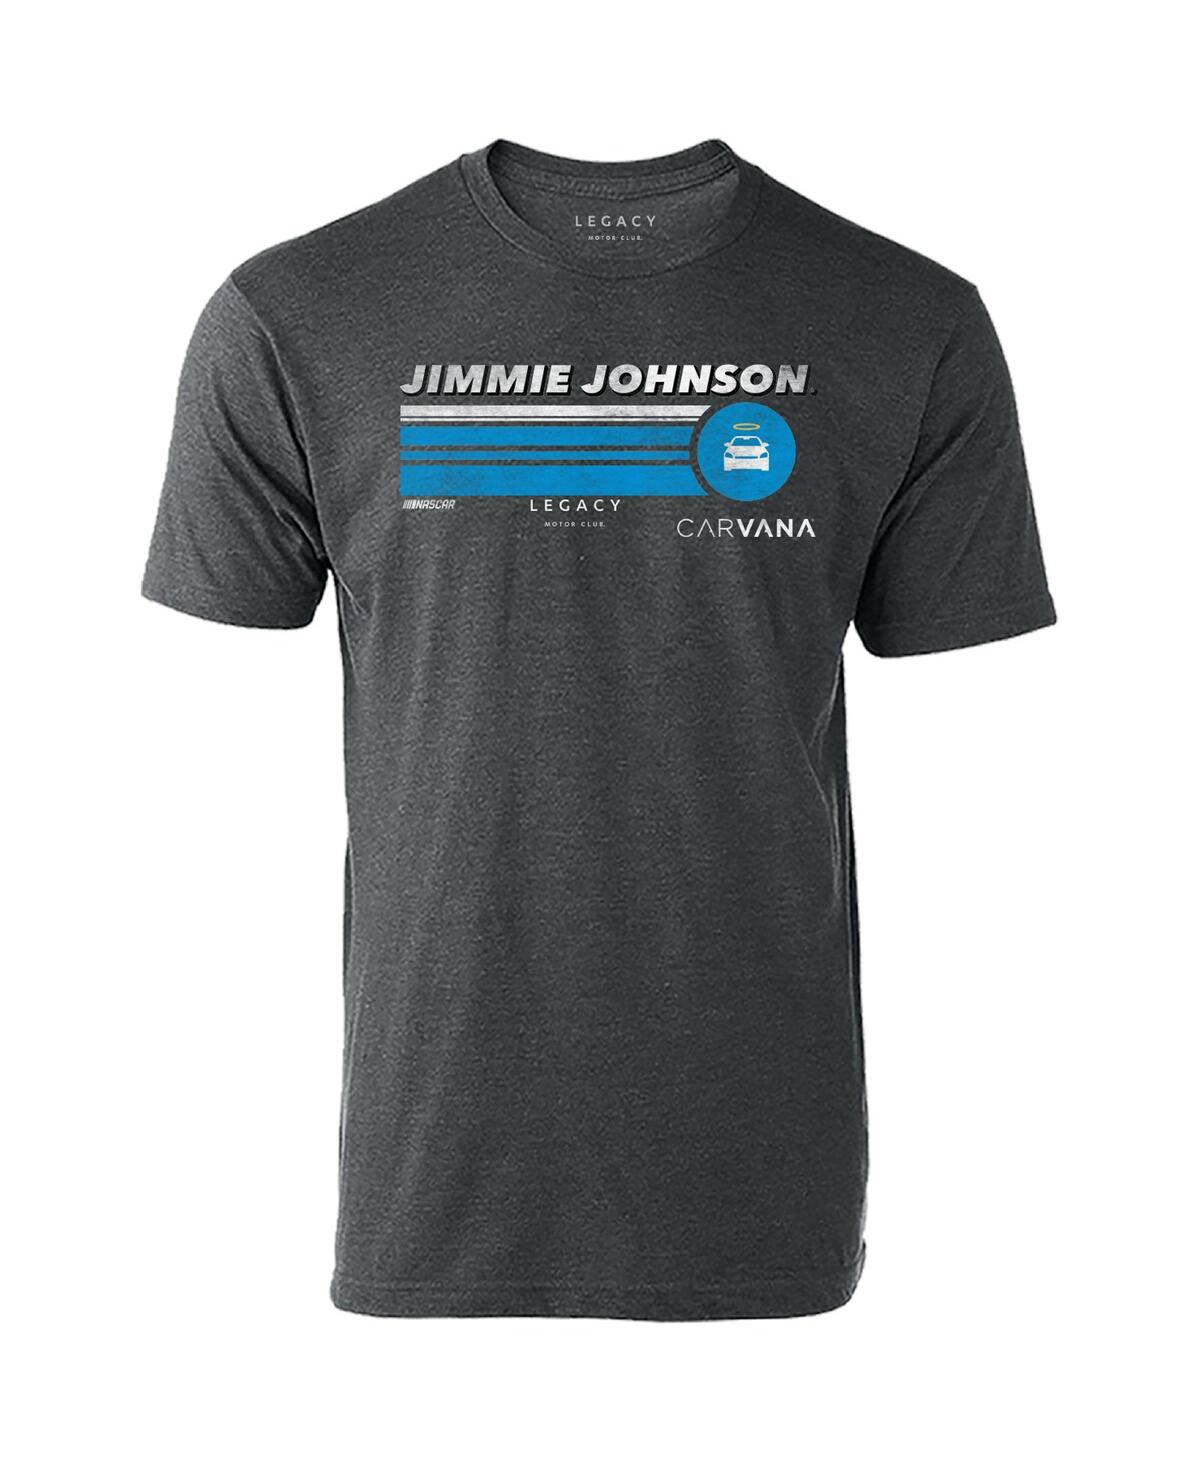 Shop Legacy Motor Club Team Collection Men's  Heather Charcoal Jimmie Johnson Hot Lap T-shirt